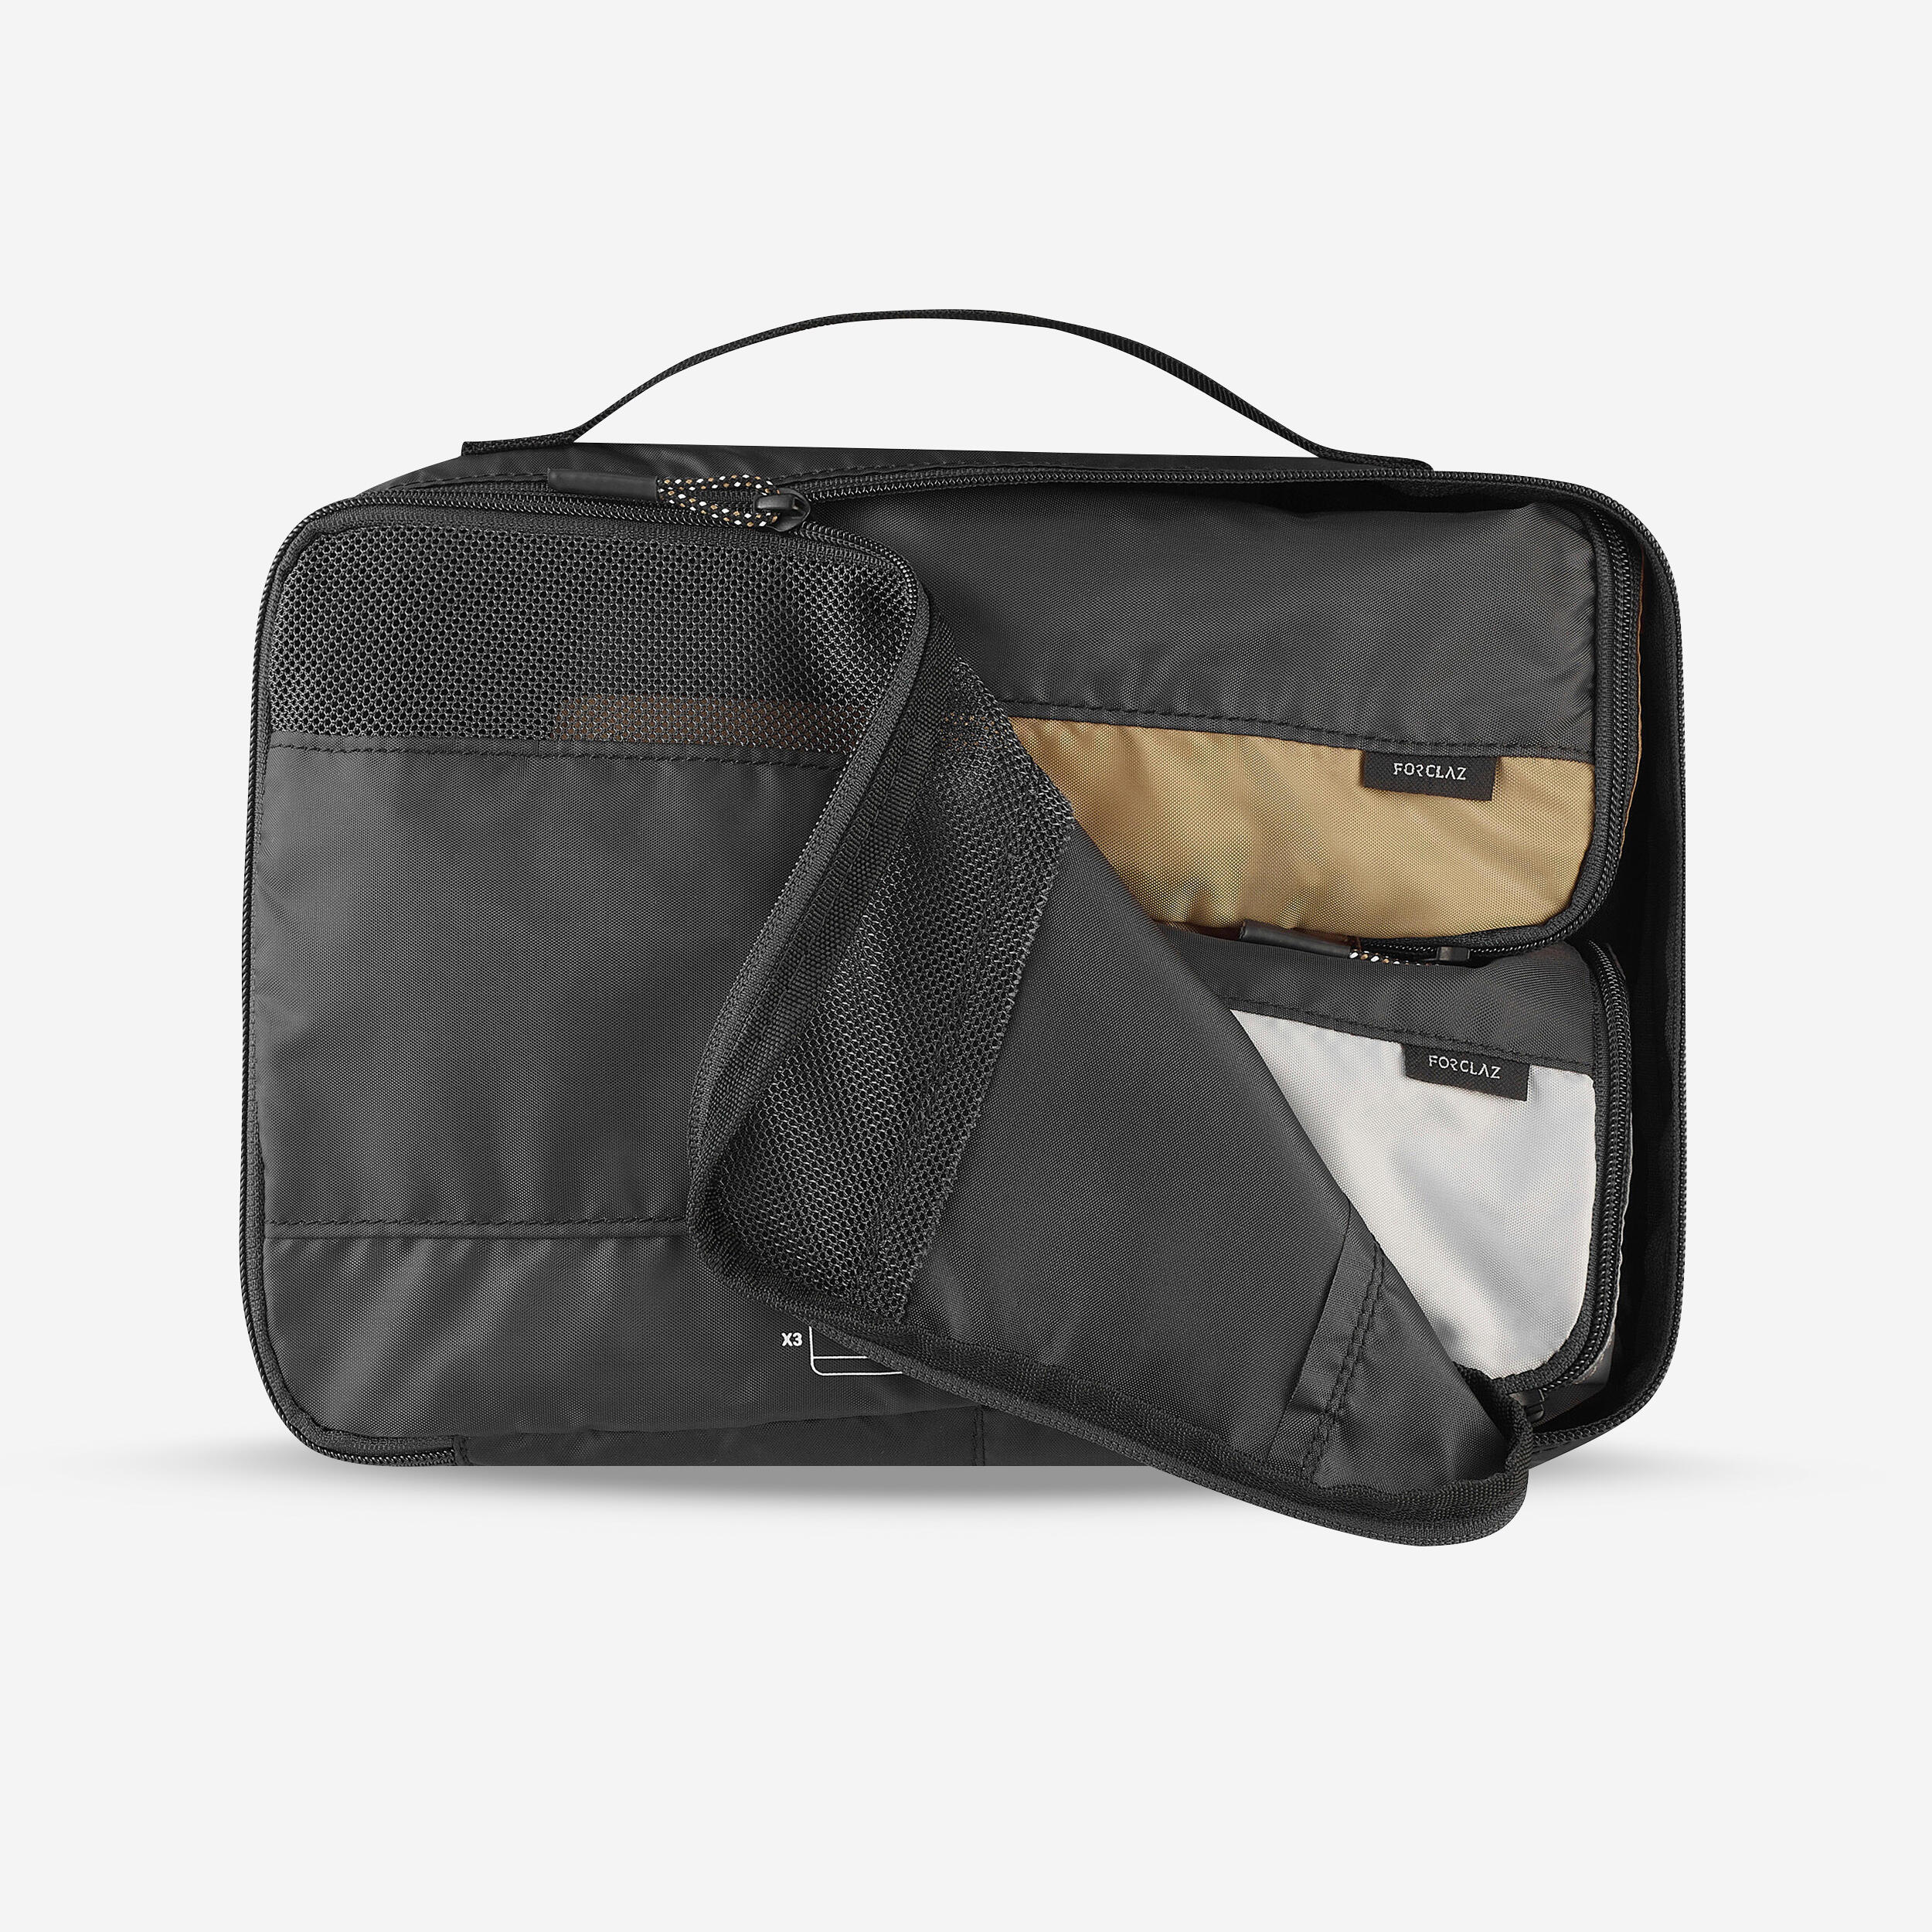 Luggage & Travel Bags | Nordstrom